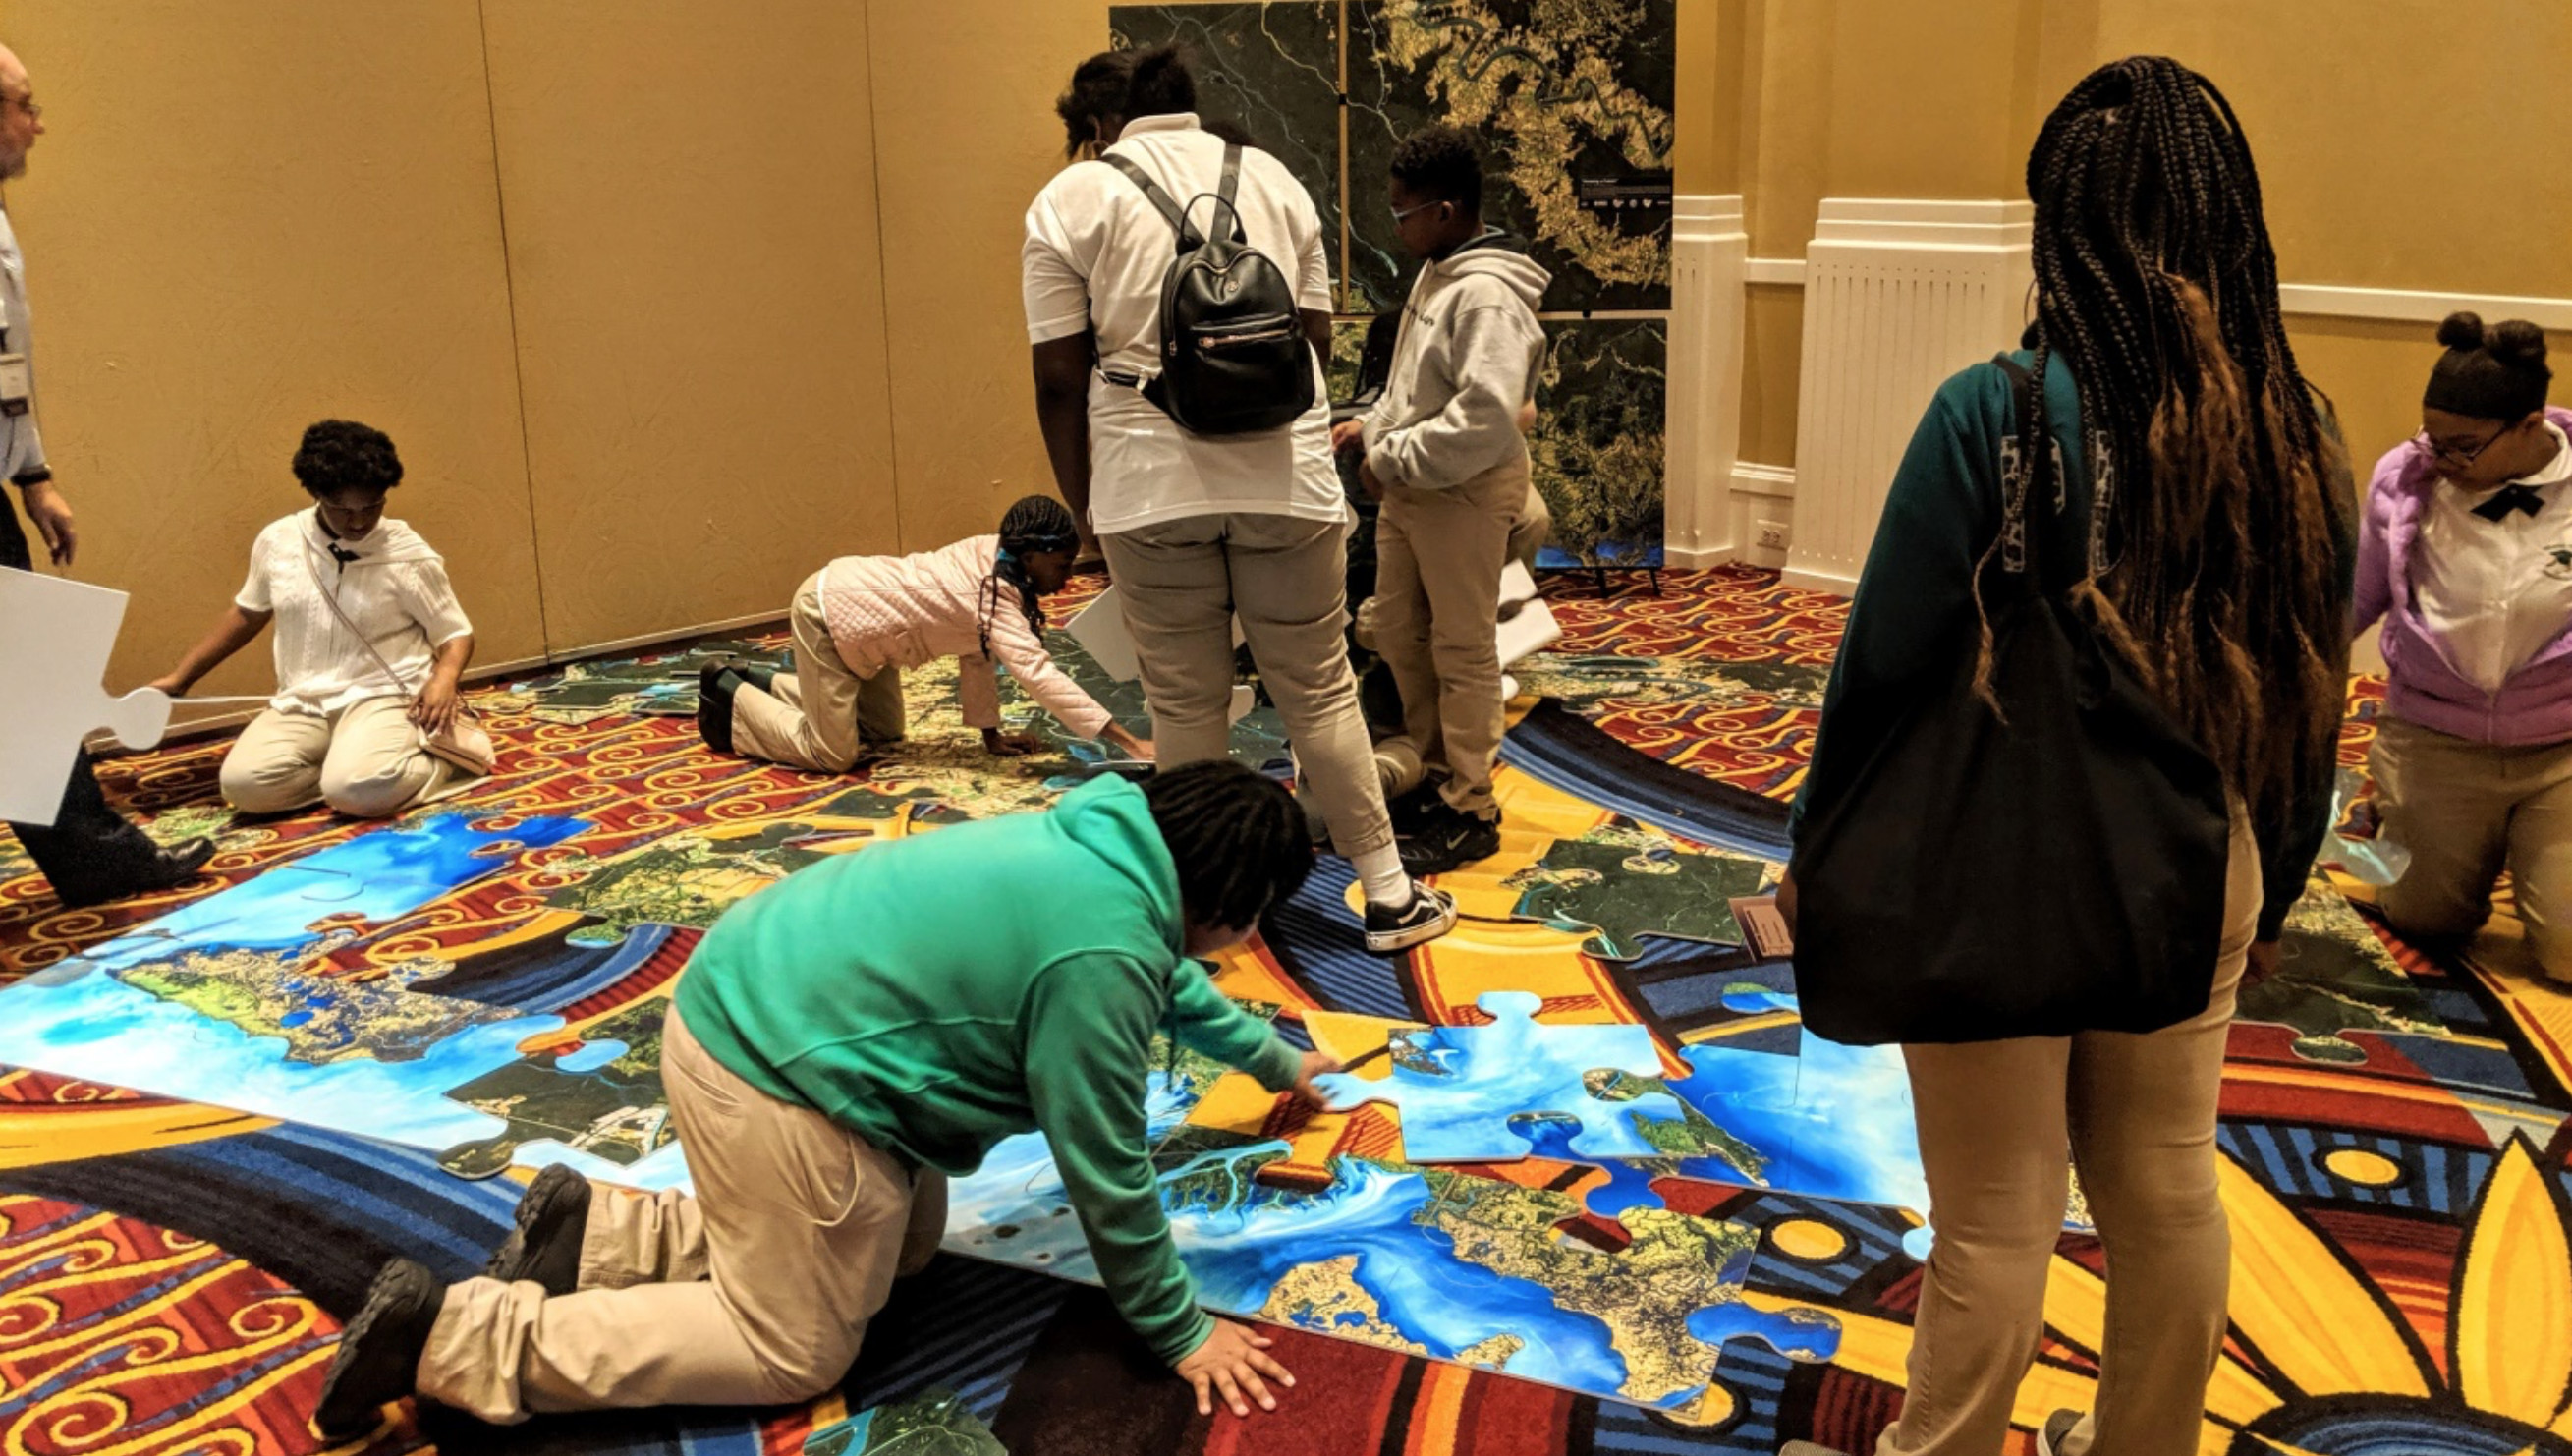 Students participate in the AmericaView Earth Observation Day event at the Pecora 21 / ISRSE 38 in Baltimore, Maryland, USA, October 2019. EOD is an AmericaView Science, Technology, Engineering, Art, and Math (STEAM) program.